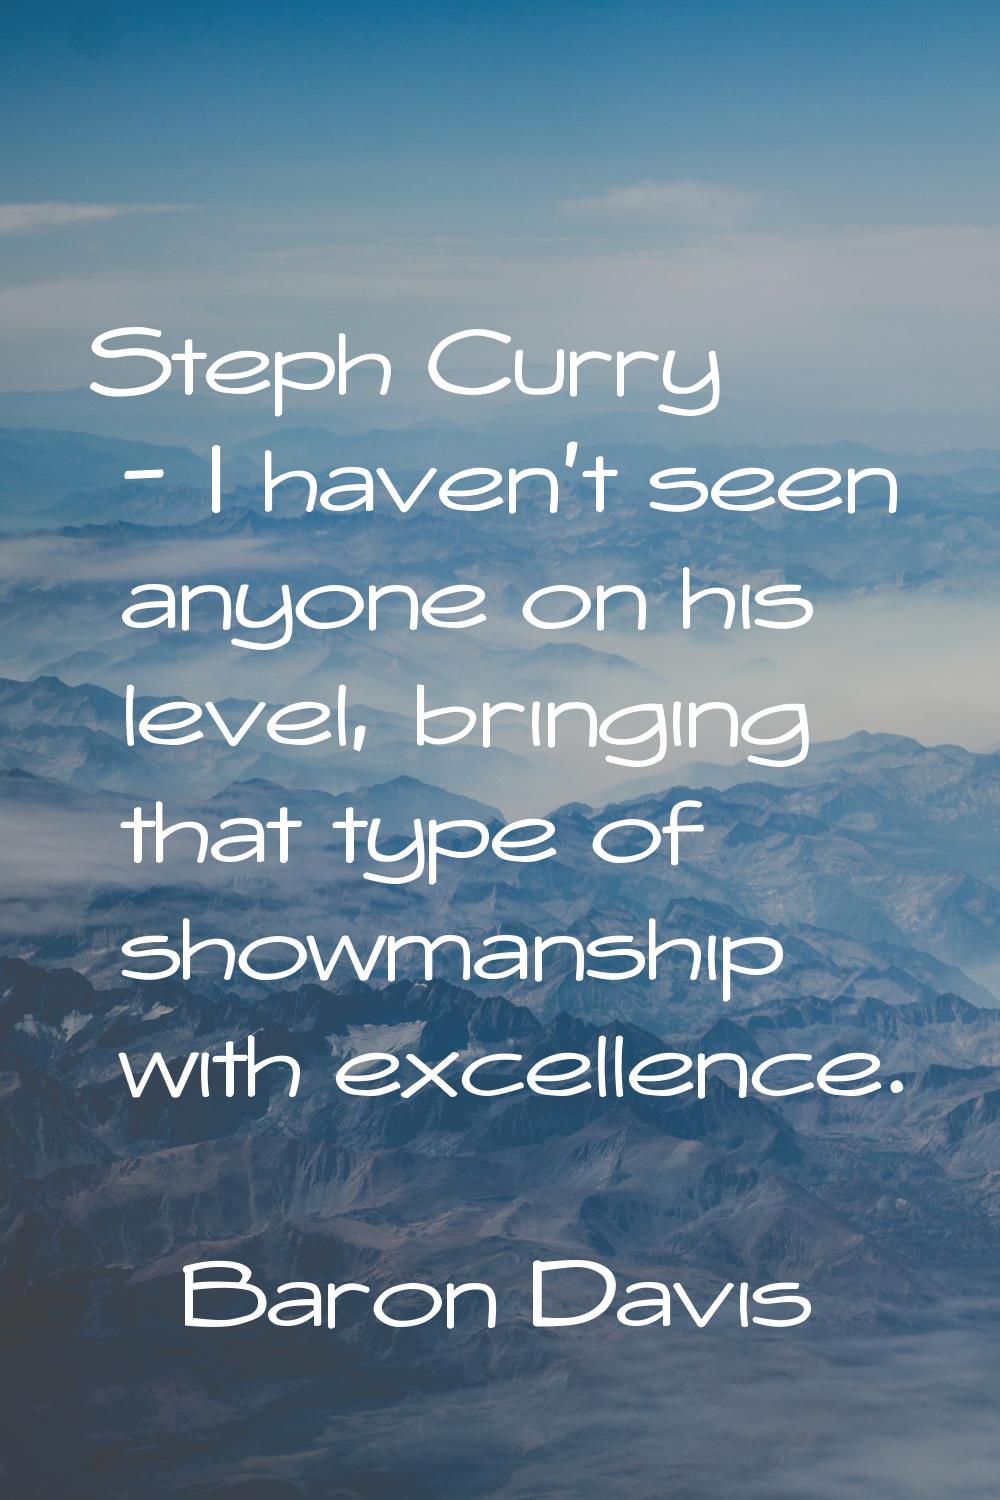 Steph Curry - I haven't seen anyone on his level, bringing that type of showmanship with excellence